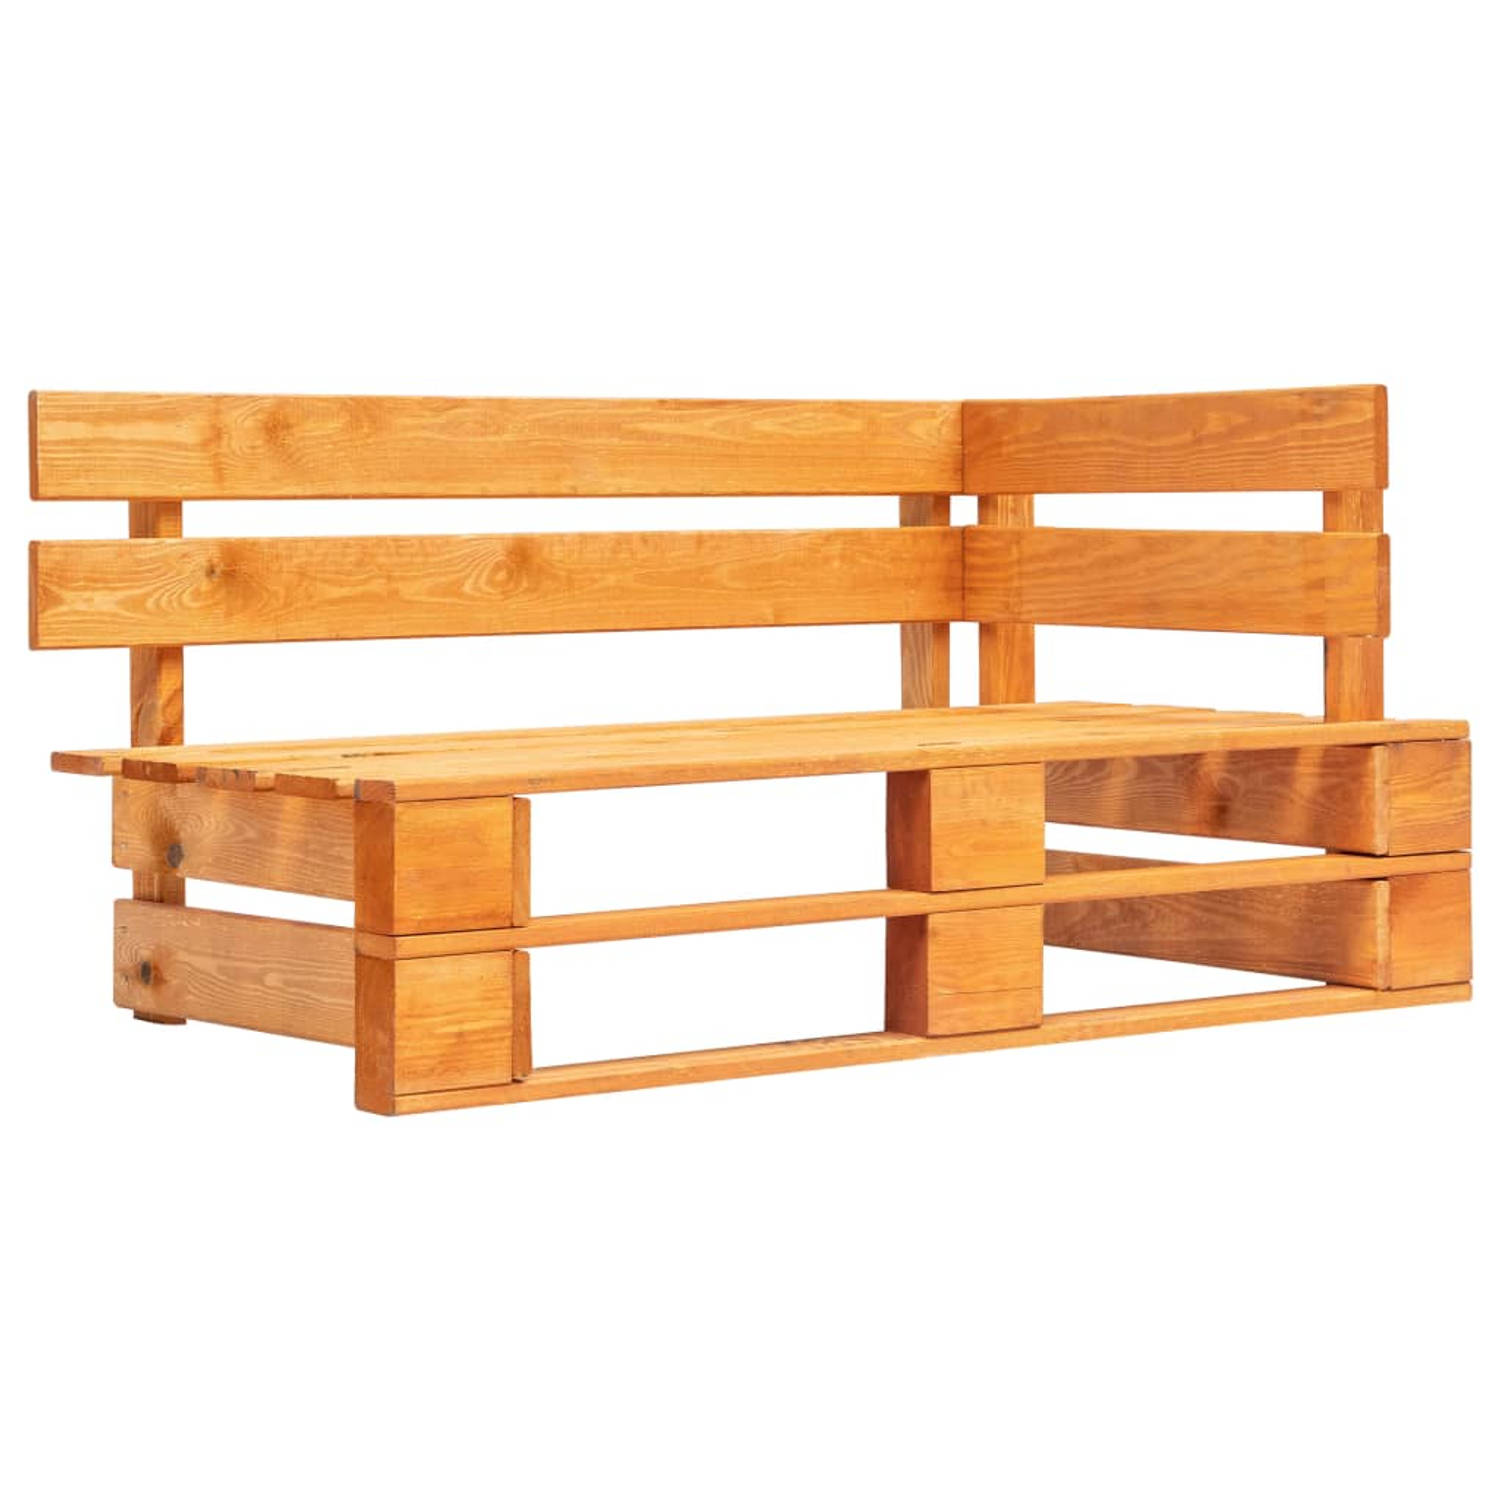 The Living Store Pallet Lounge tuinmeubelset - 110 x 65 x 55 cm - grenenhout - blauwe kussens